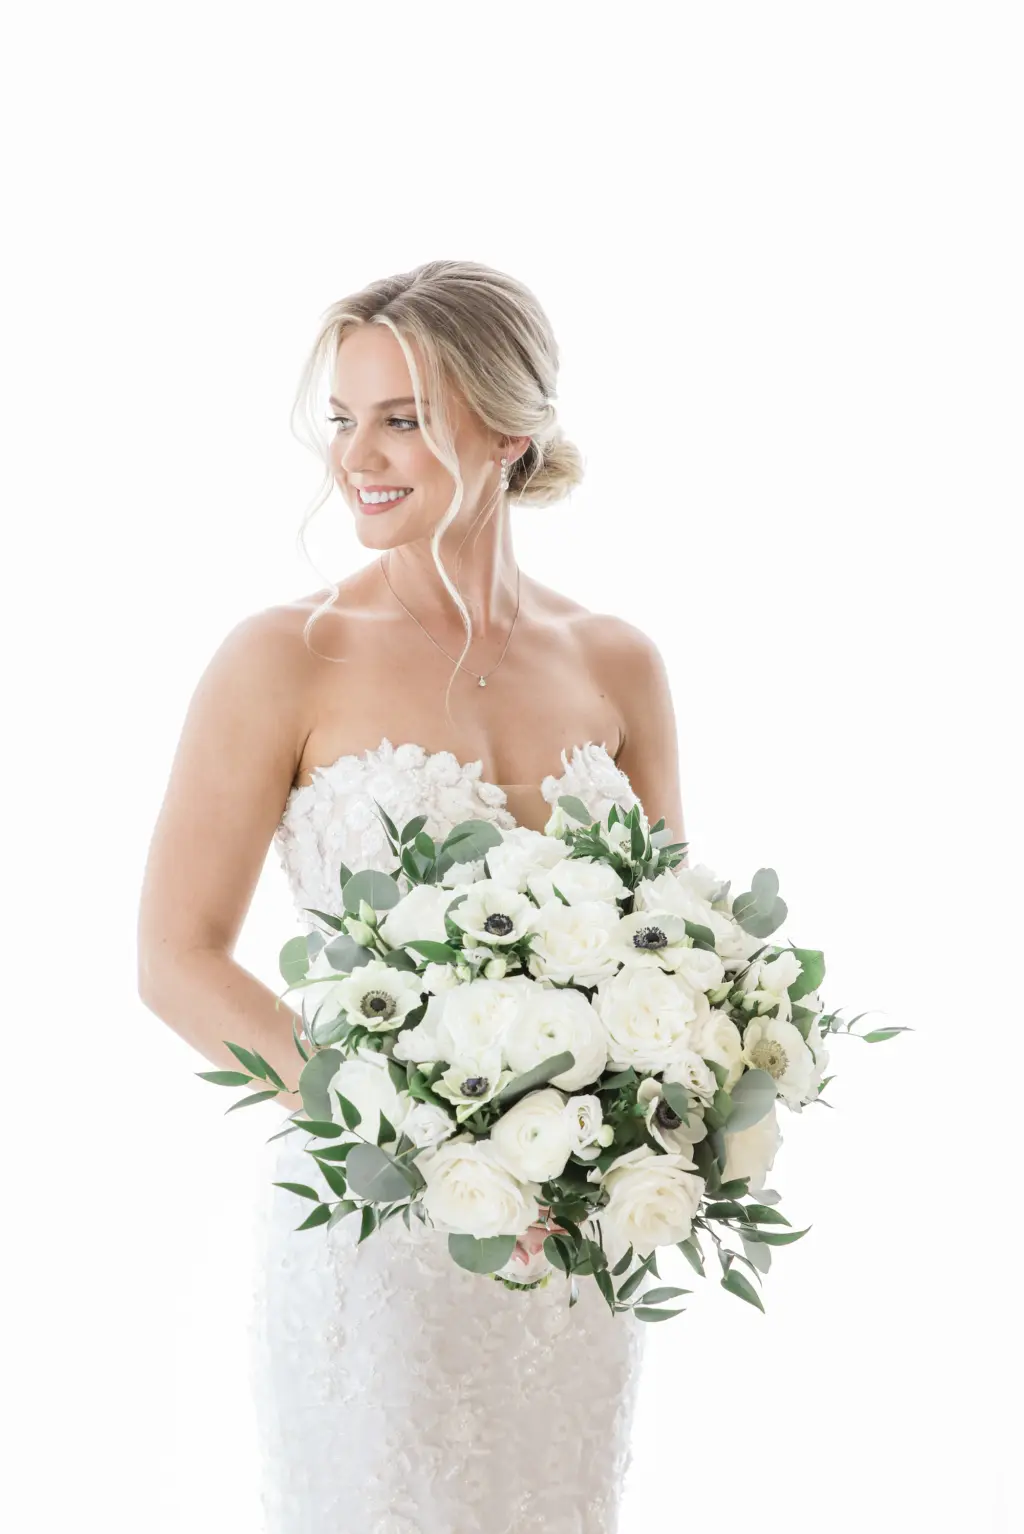 Elegant Wedding Hair and Makeup Inspiration | Low Bridal Bun Chignon Ideas | Monochromatic Bridal Bouquet Ideas with Roses, Anemone, and Greenery | Tampa Bay Photographer Lifelong Photography